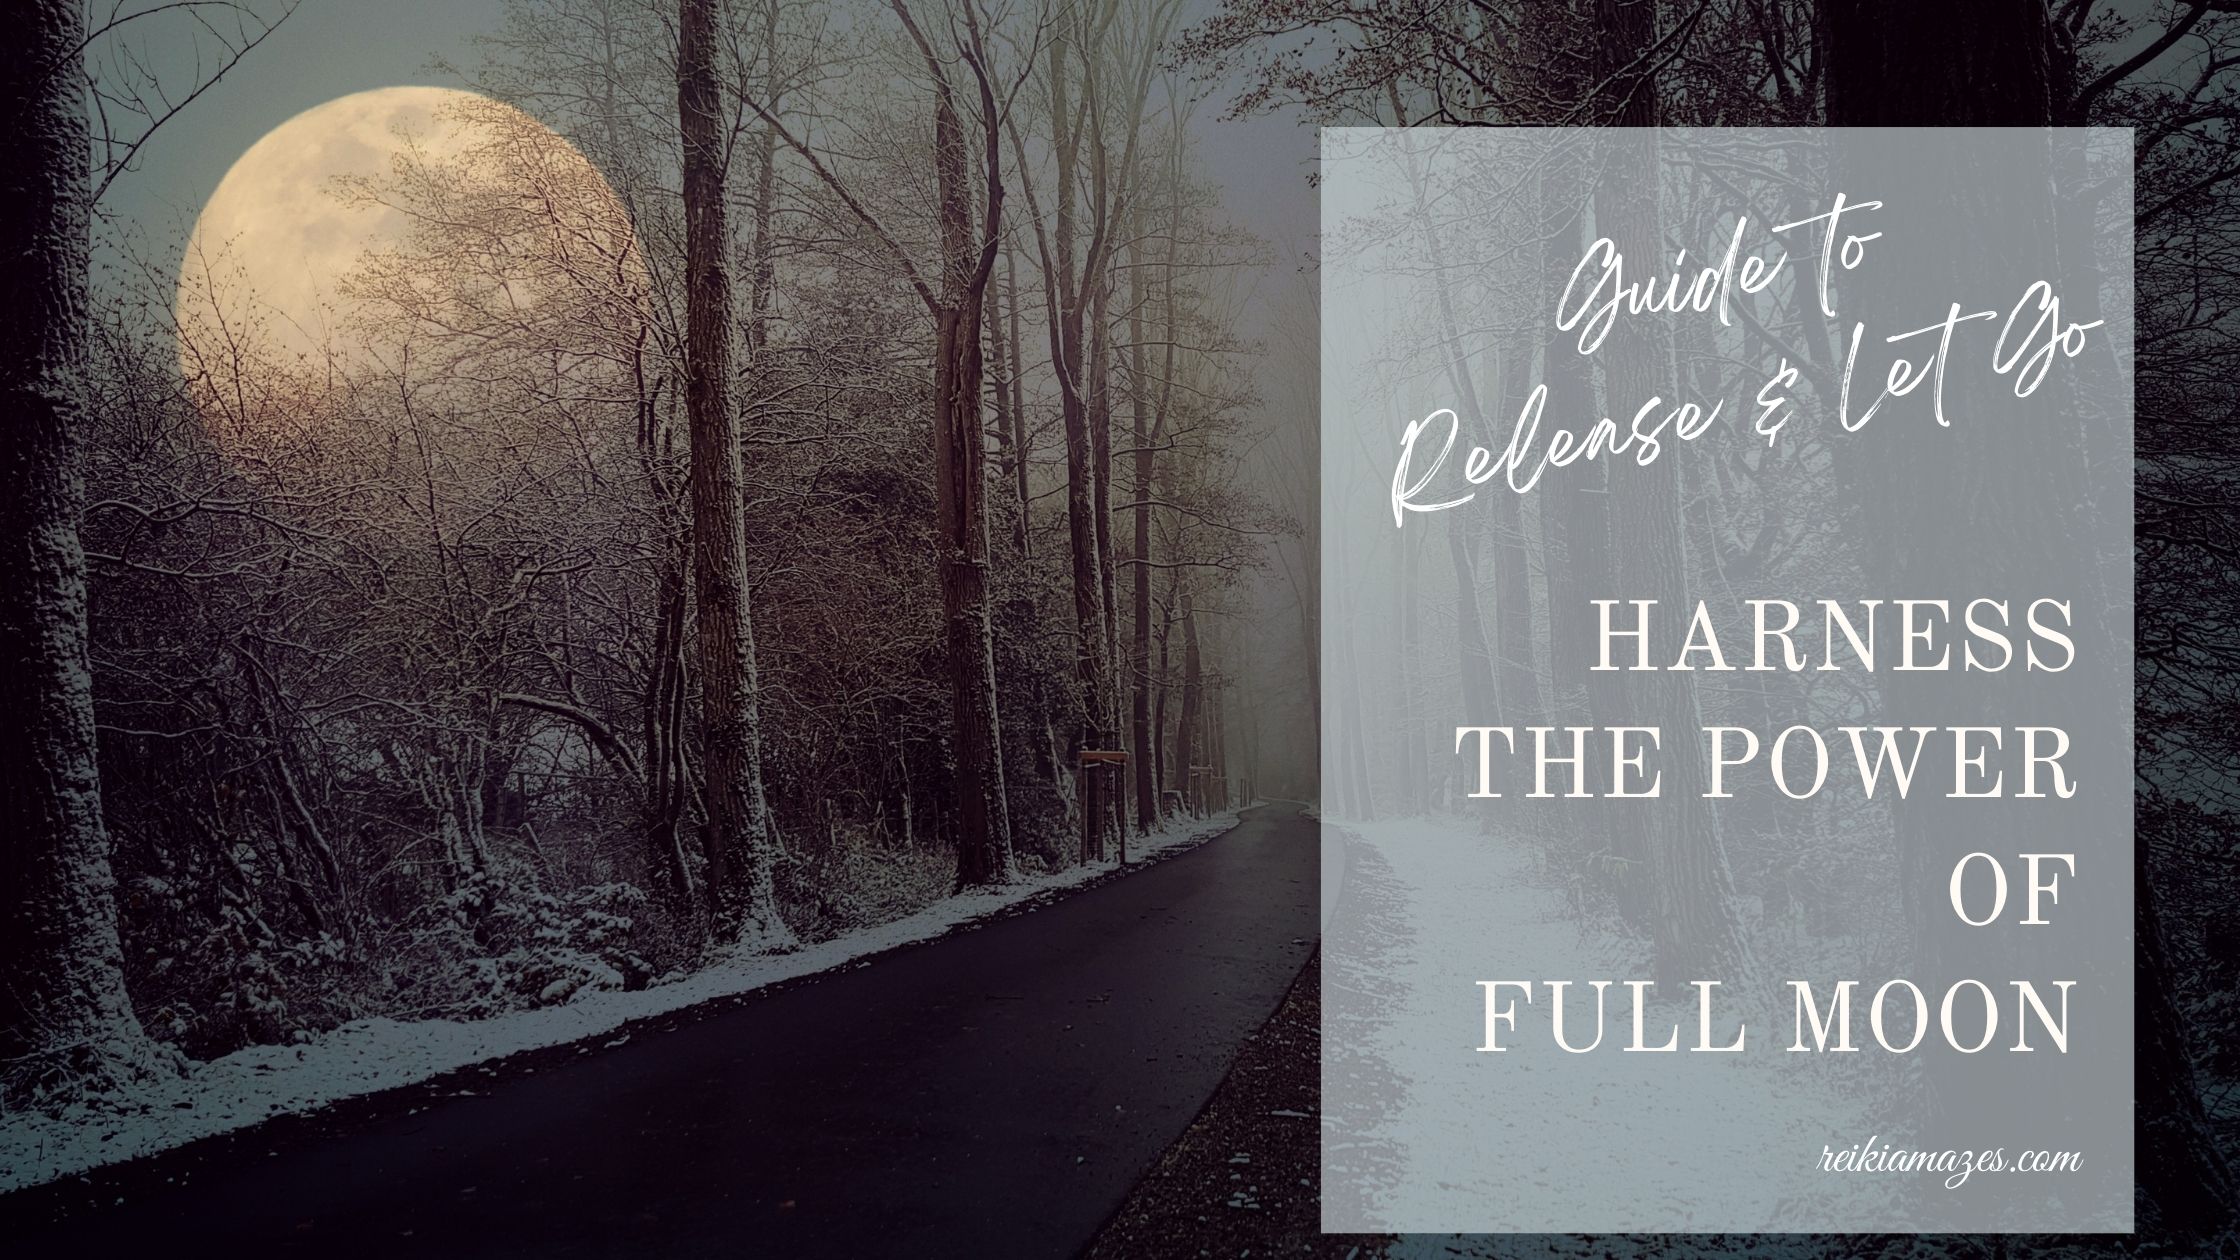 Harness the Power of the Full Moon Your Guide to Release & Let Go